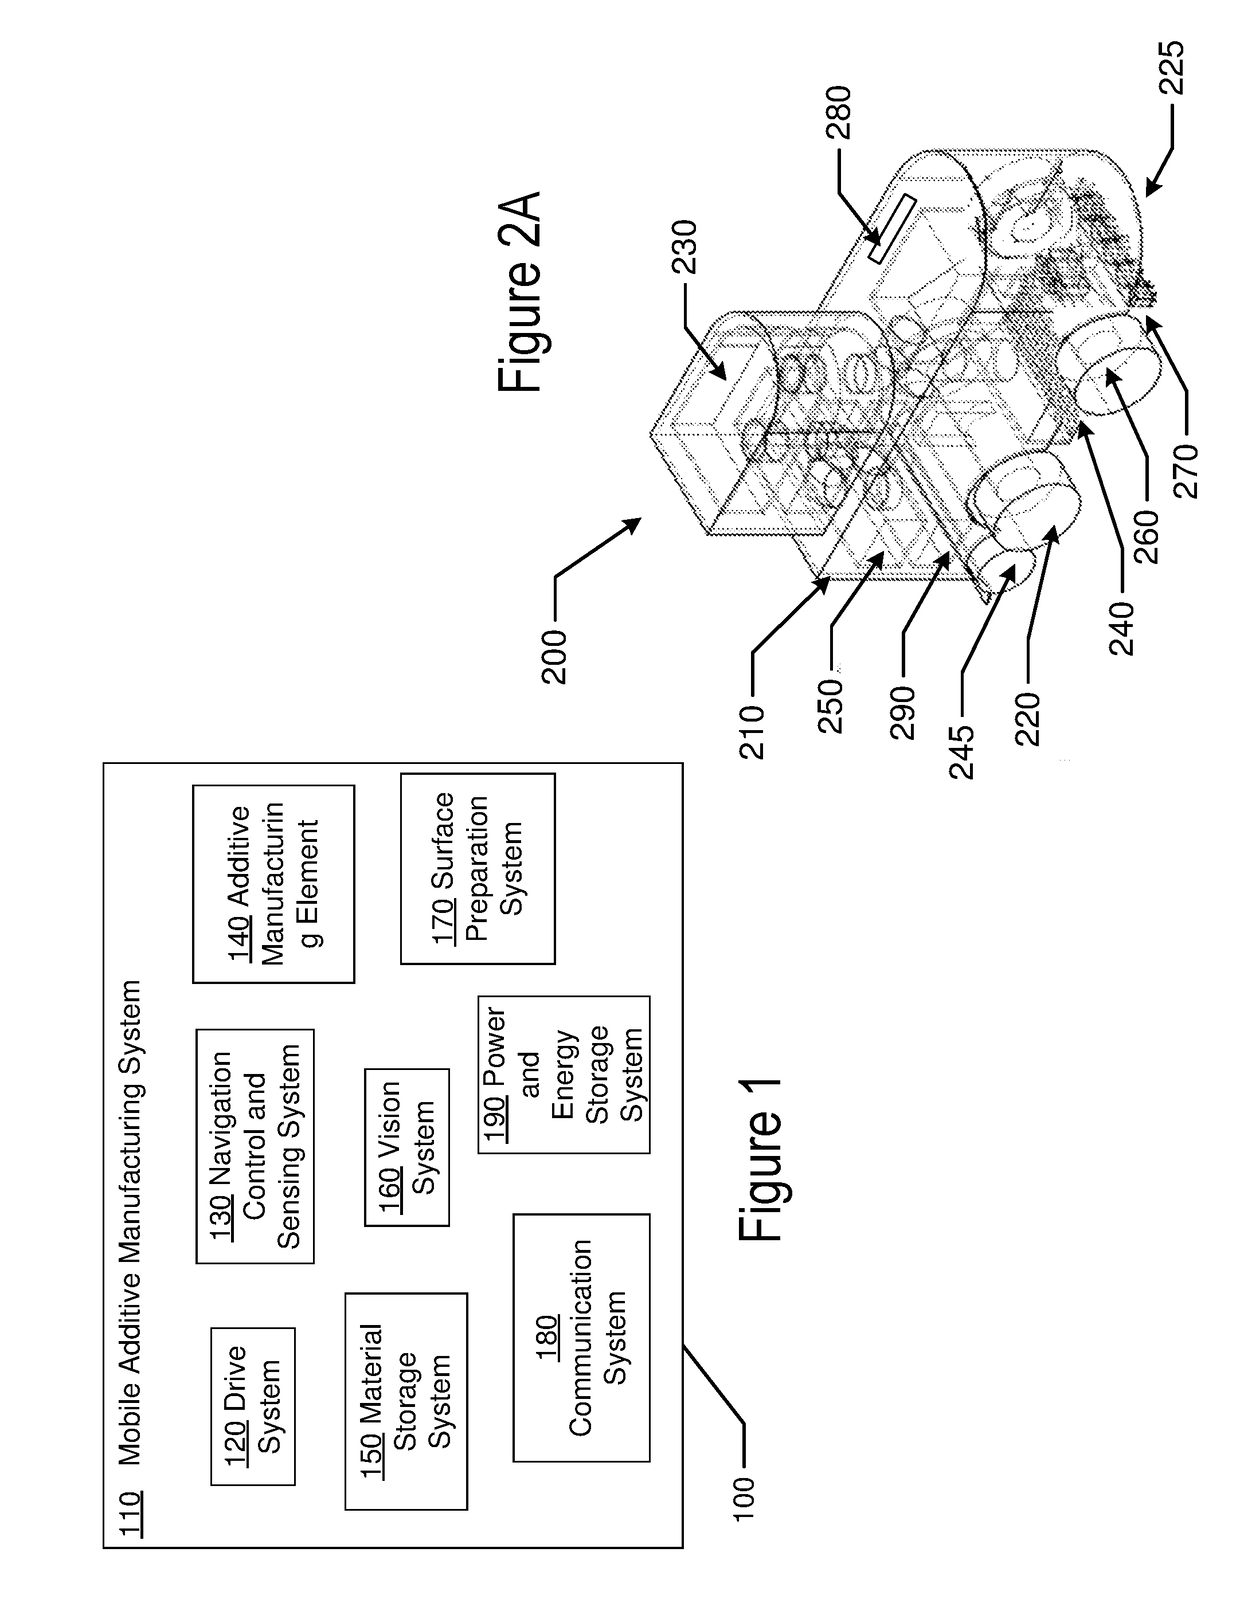 Methods, materials and apparatus for mobile additive manufacturing of advanced structures and roadways